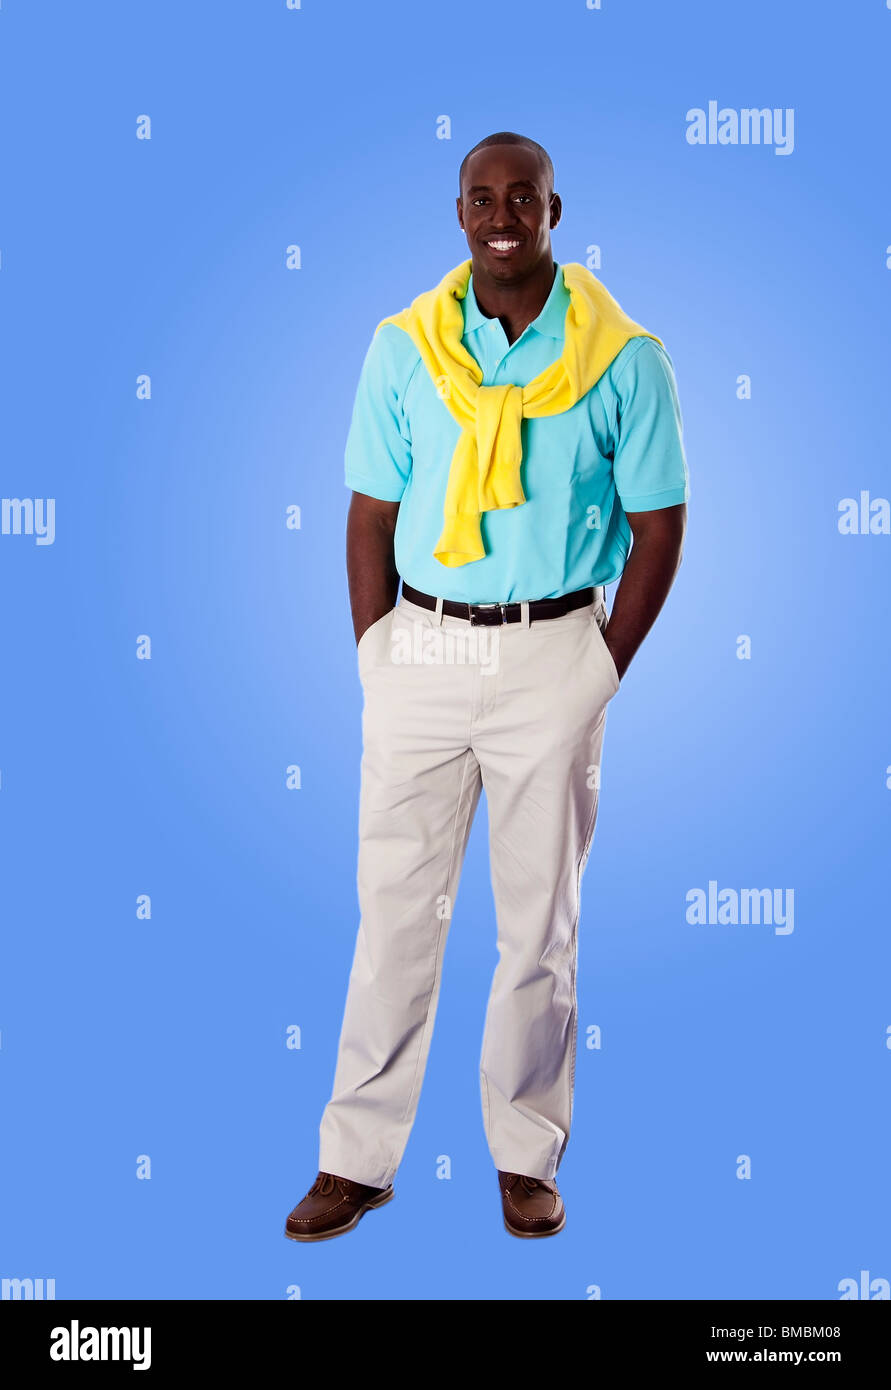 Handsome happy African American corporate business man smiling, standing with hands in pocket, wearing blue shirt. Stock Photo